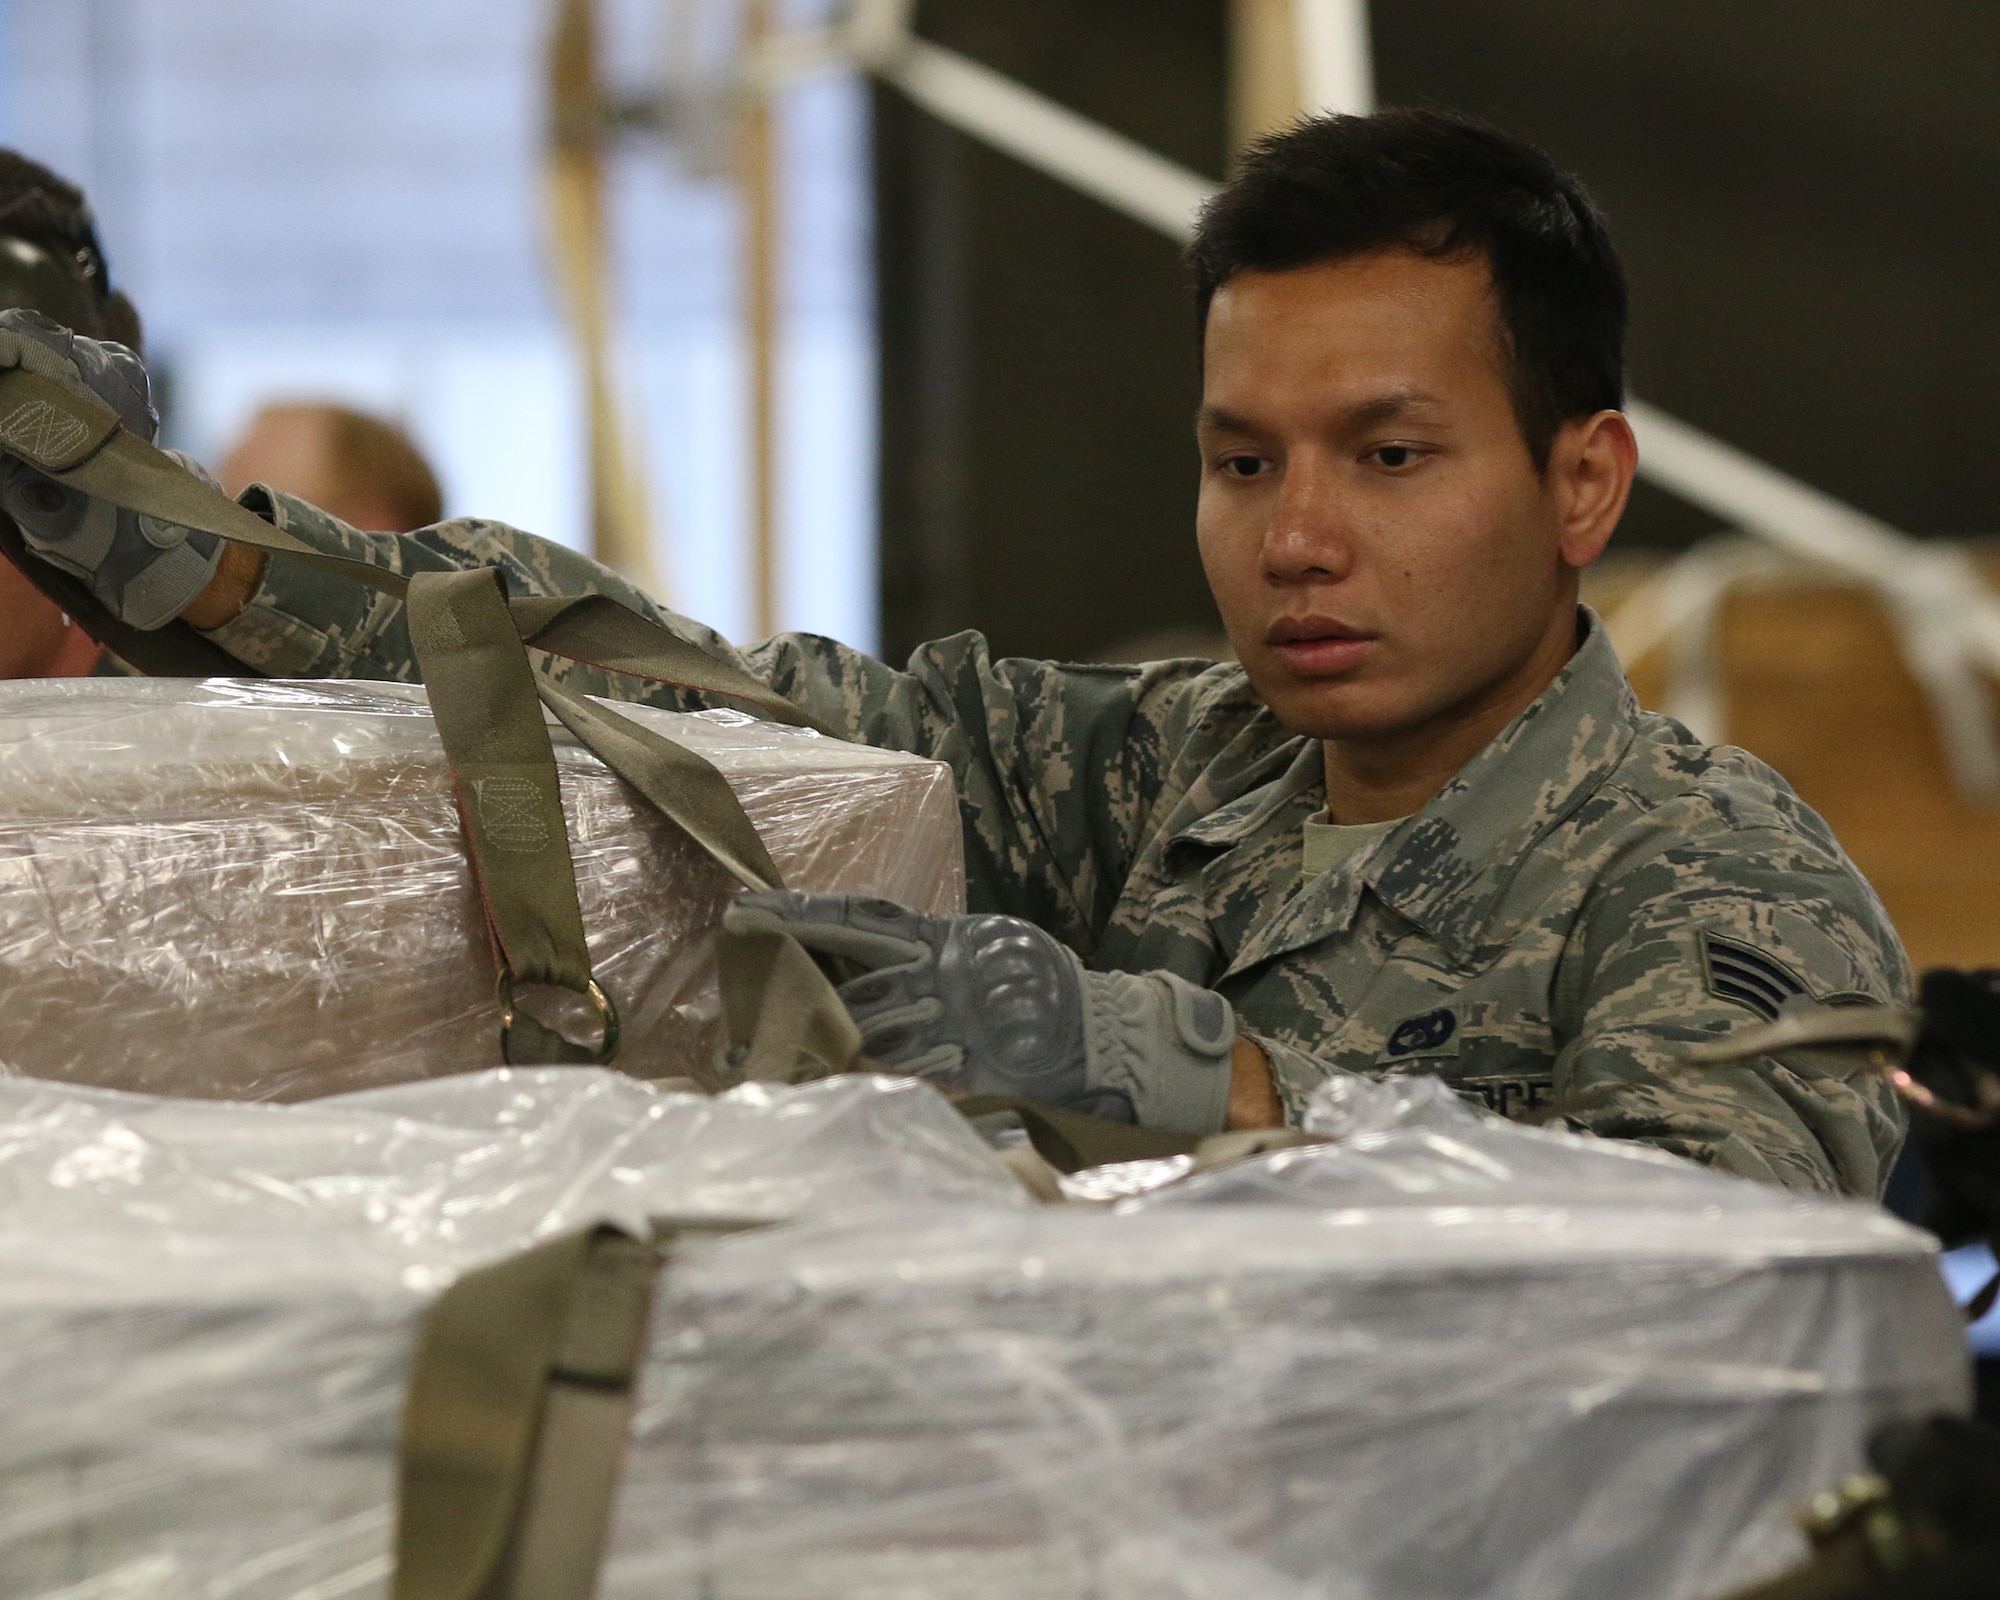 WRIGHT-PATTERSON AIR FORCE BASE, Ohio – Senior Airman Ney Htet, 87th Aerial Port Squadron cargo processor, connects cargo straps onto pallets simulated for transportation by C-17 Globemaster III during training held on the Nov. 6, 2015 unit training assembly. (U.S. Air Force photo /Tech. Sgt. Patrick O’Reilly)